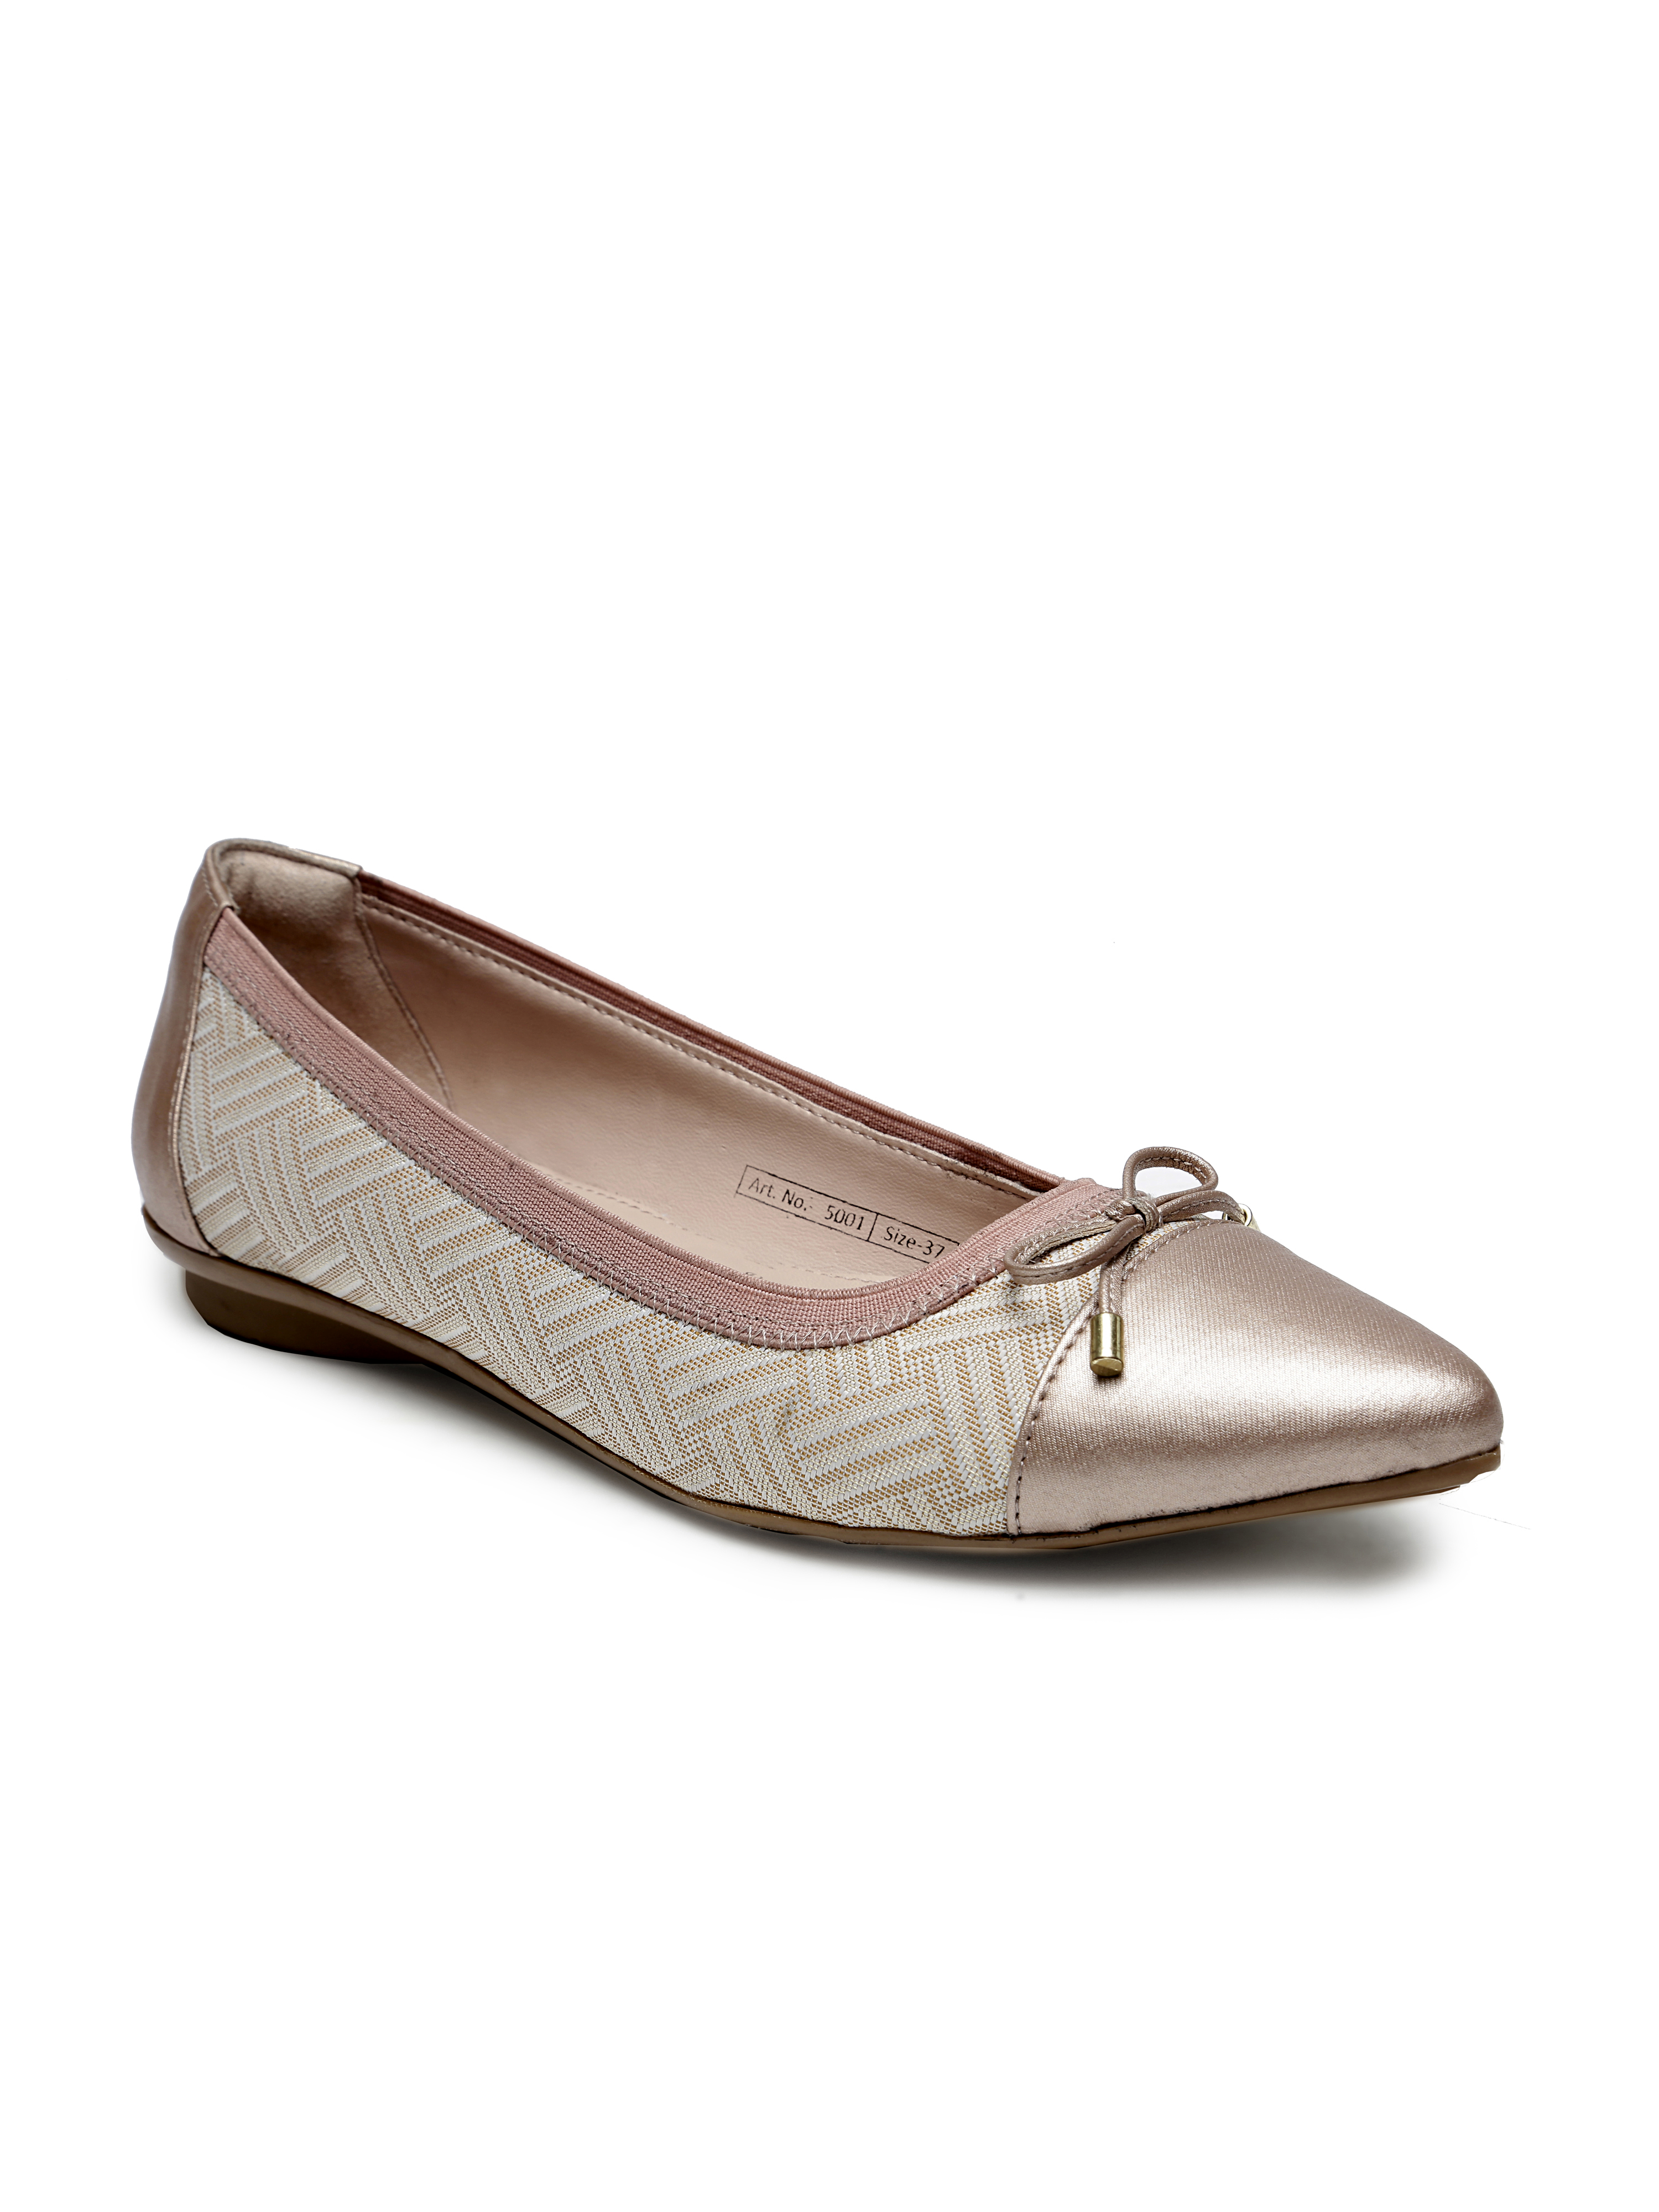 Buy Von Wellx Germany Comfort Women's Peach Casual Shoes Lisa Online in Nagpur